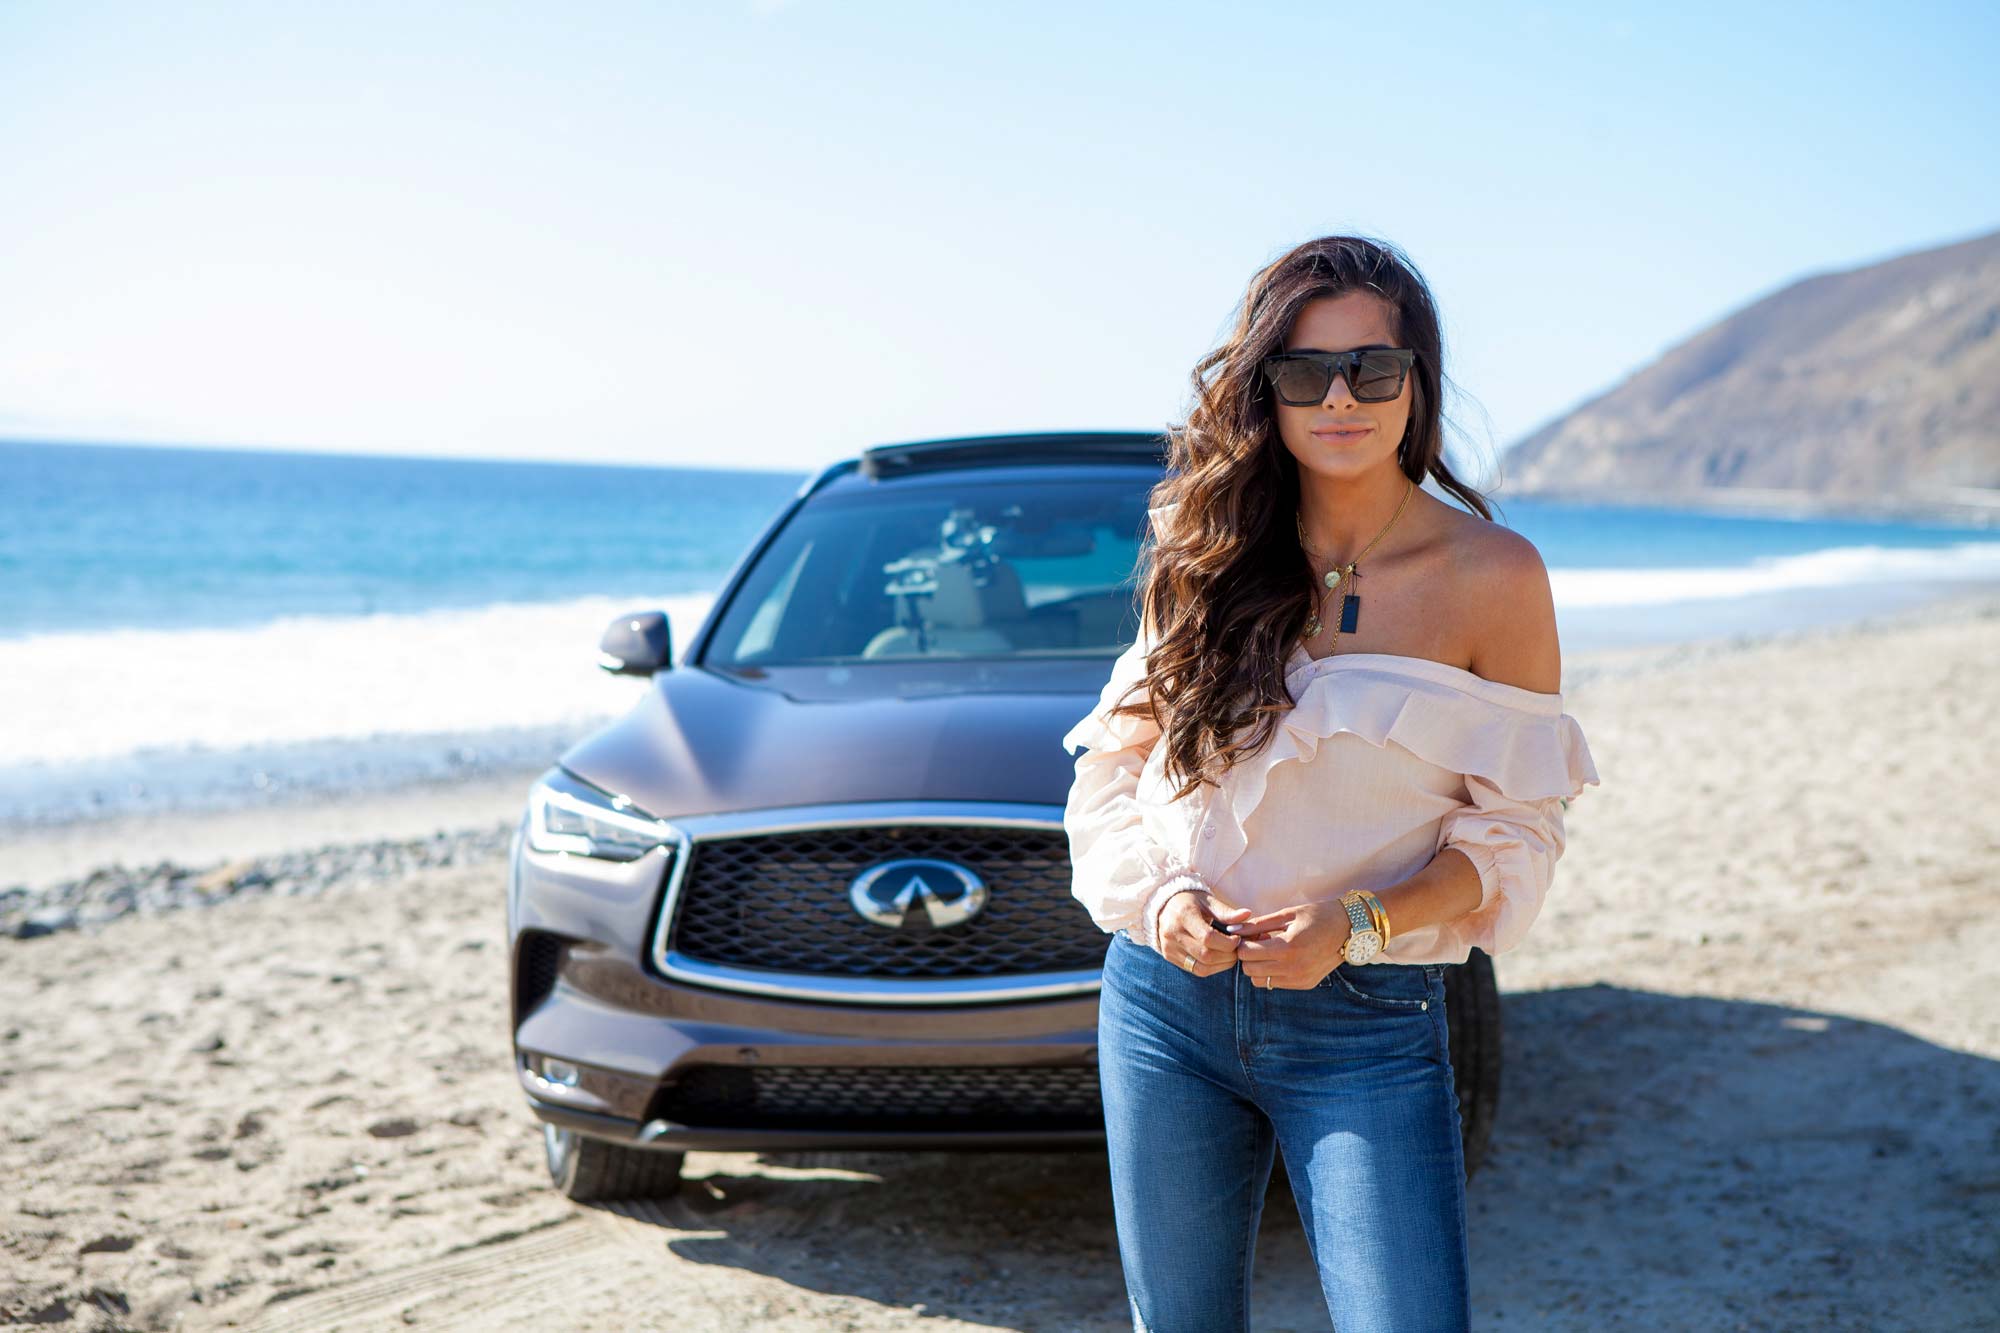 Fashion Photography of social media influencer driving and standing in front of new Infiniti QX50 car